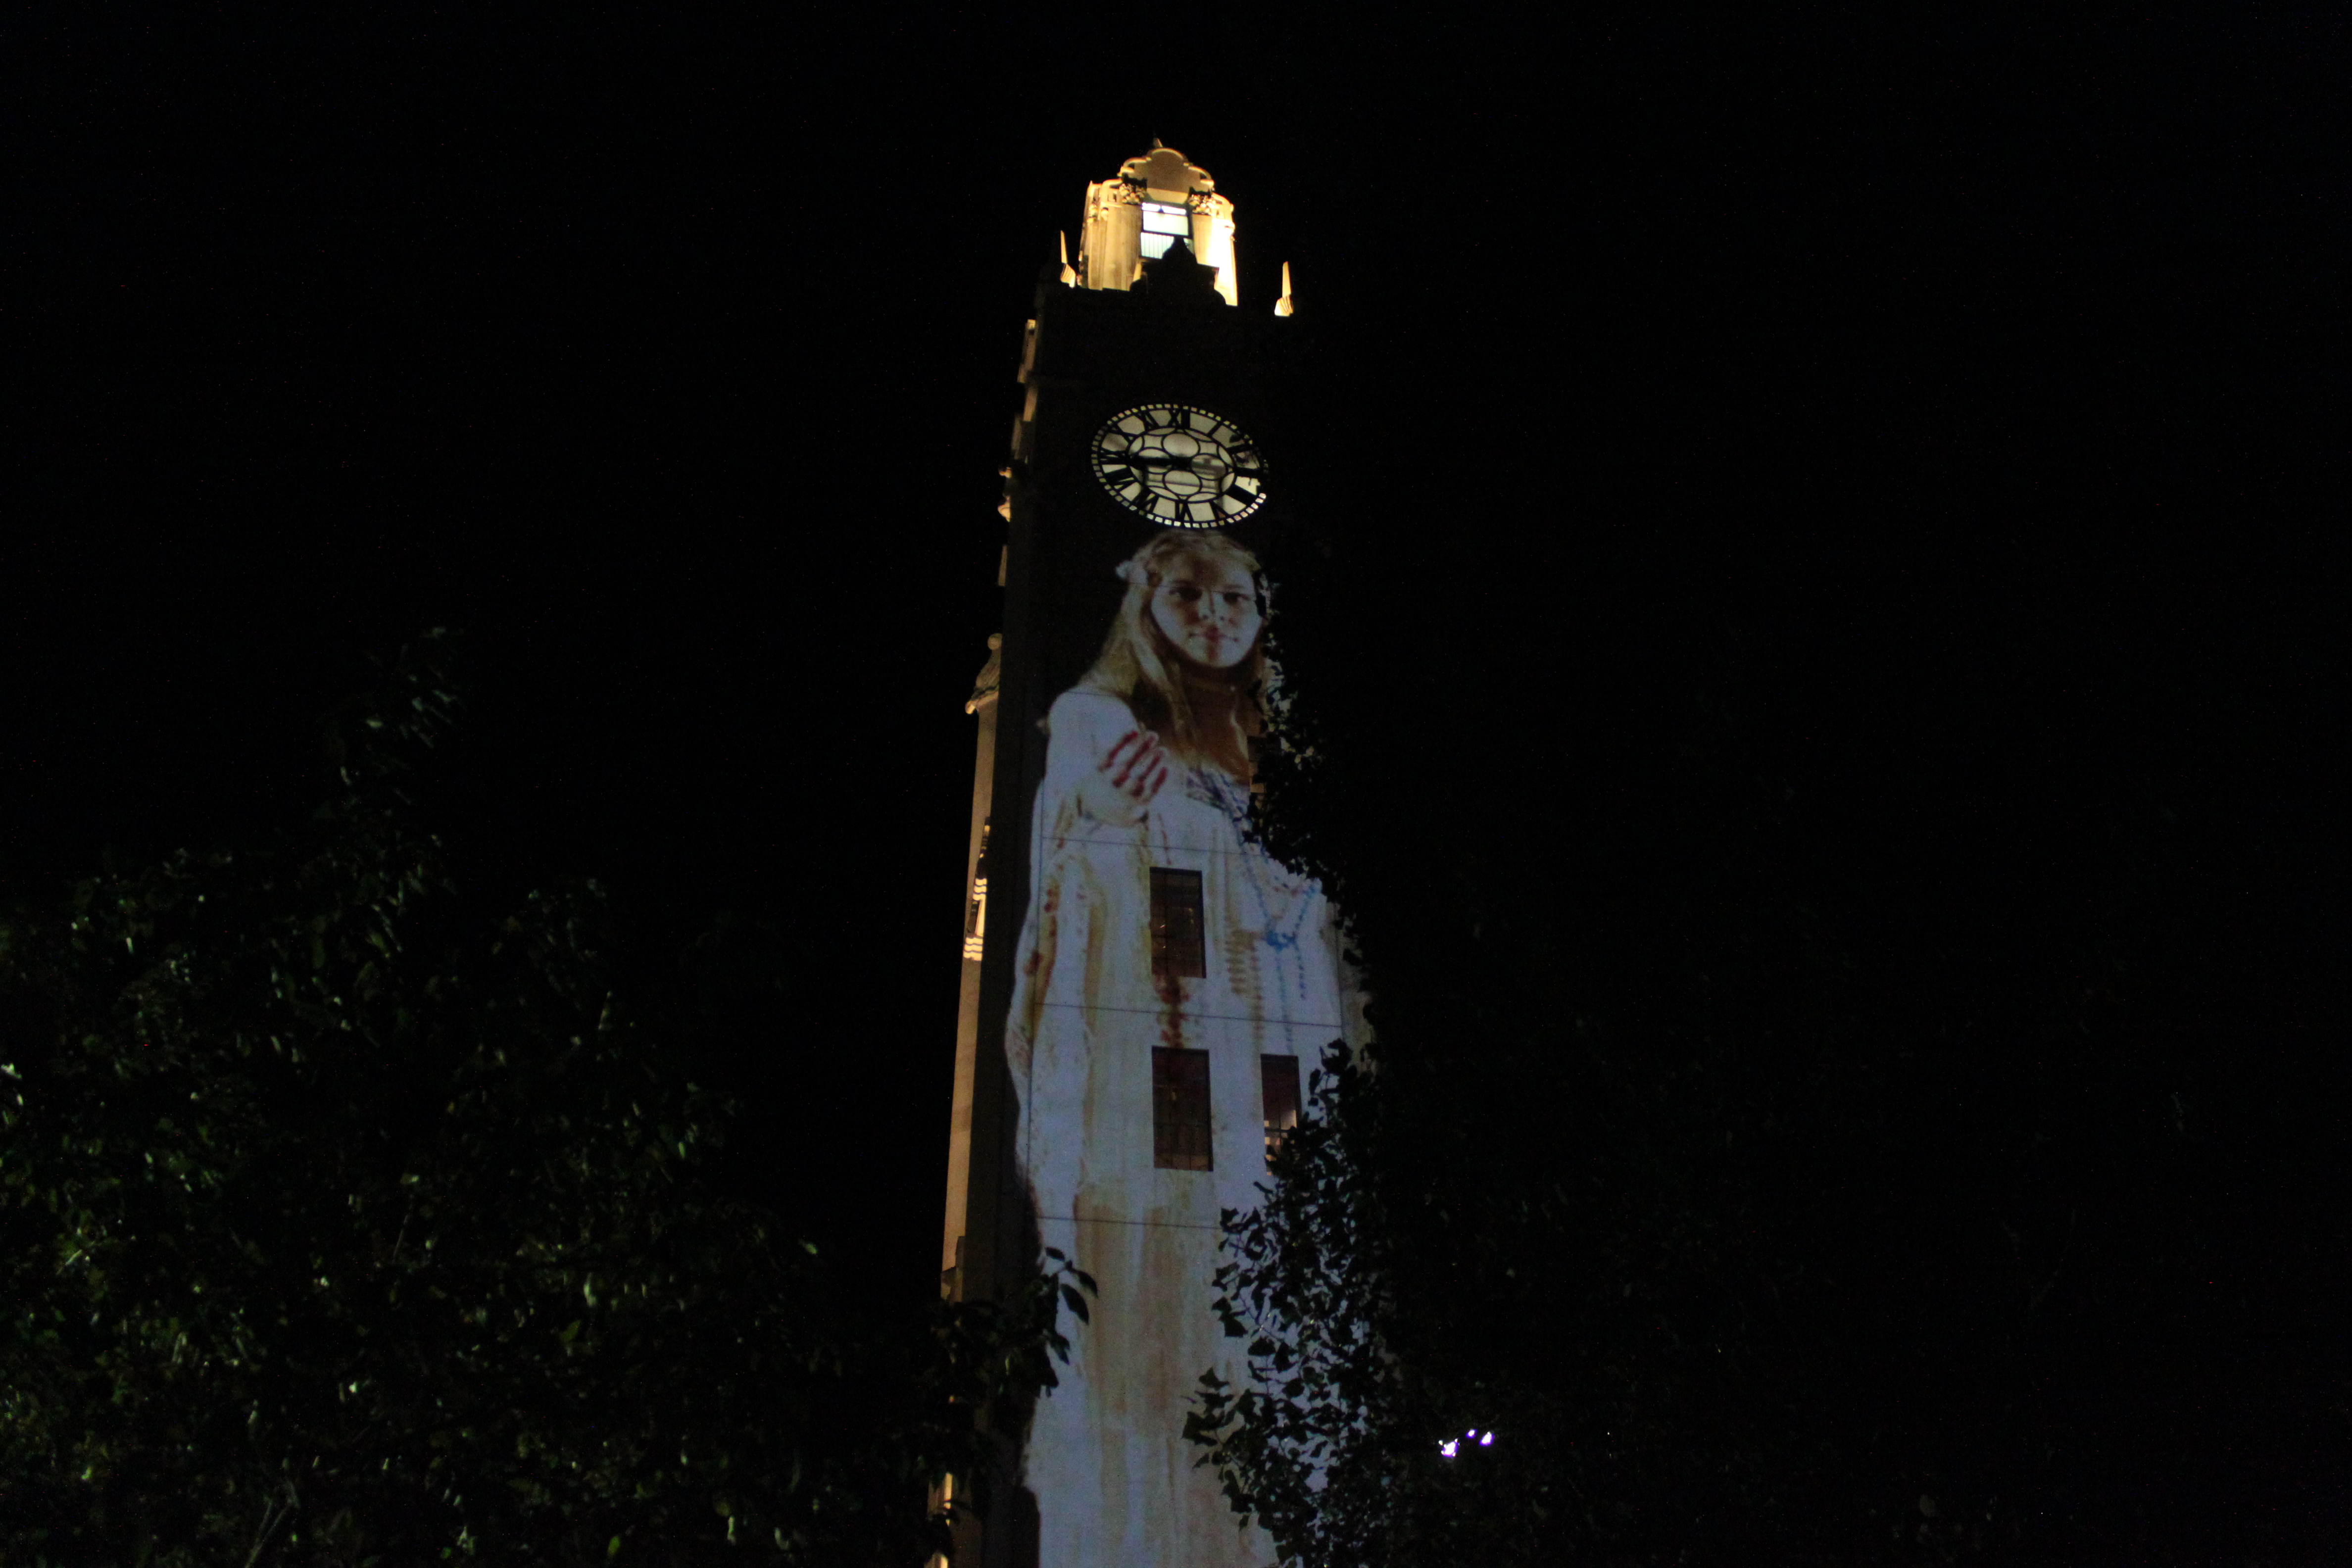 "Suzanne" projected on the clock tower at Montreal's old port.